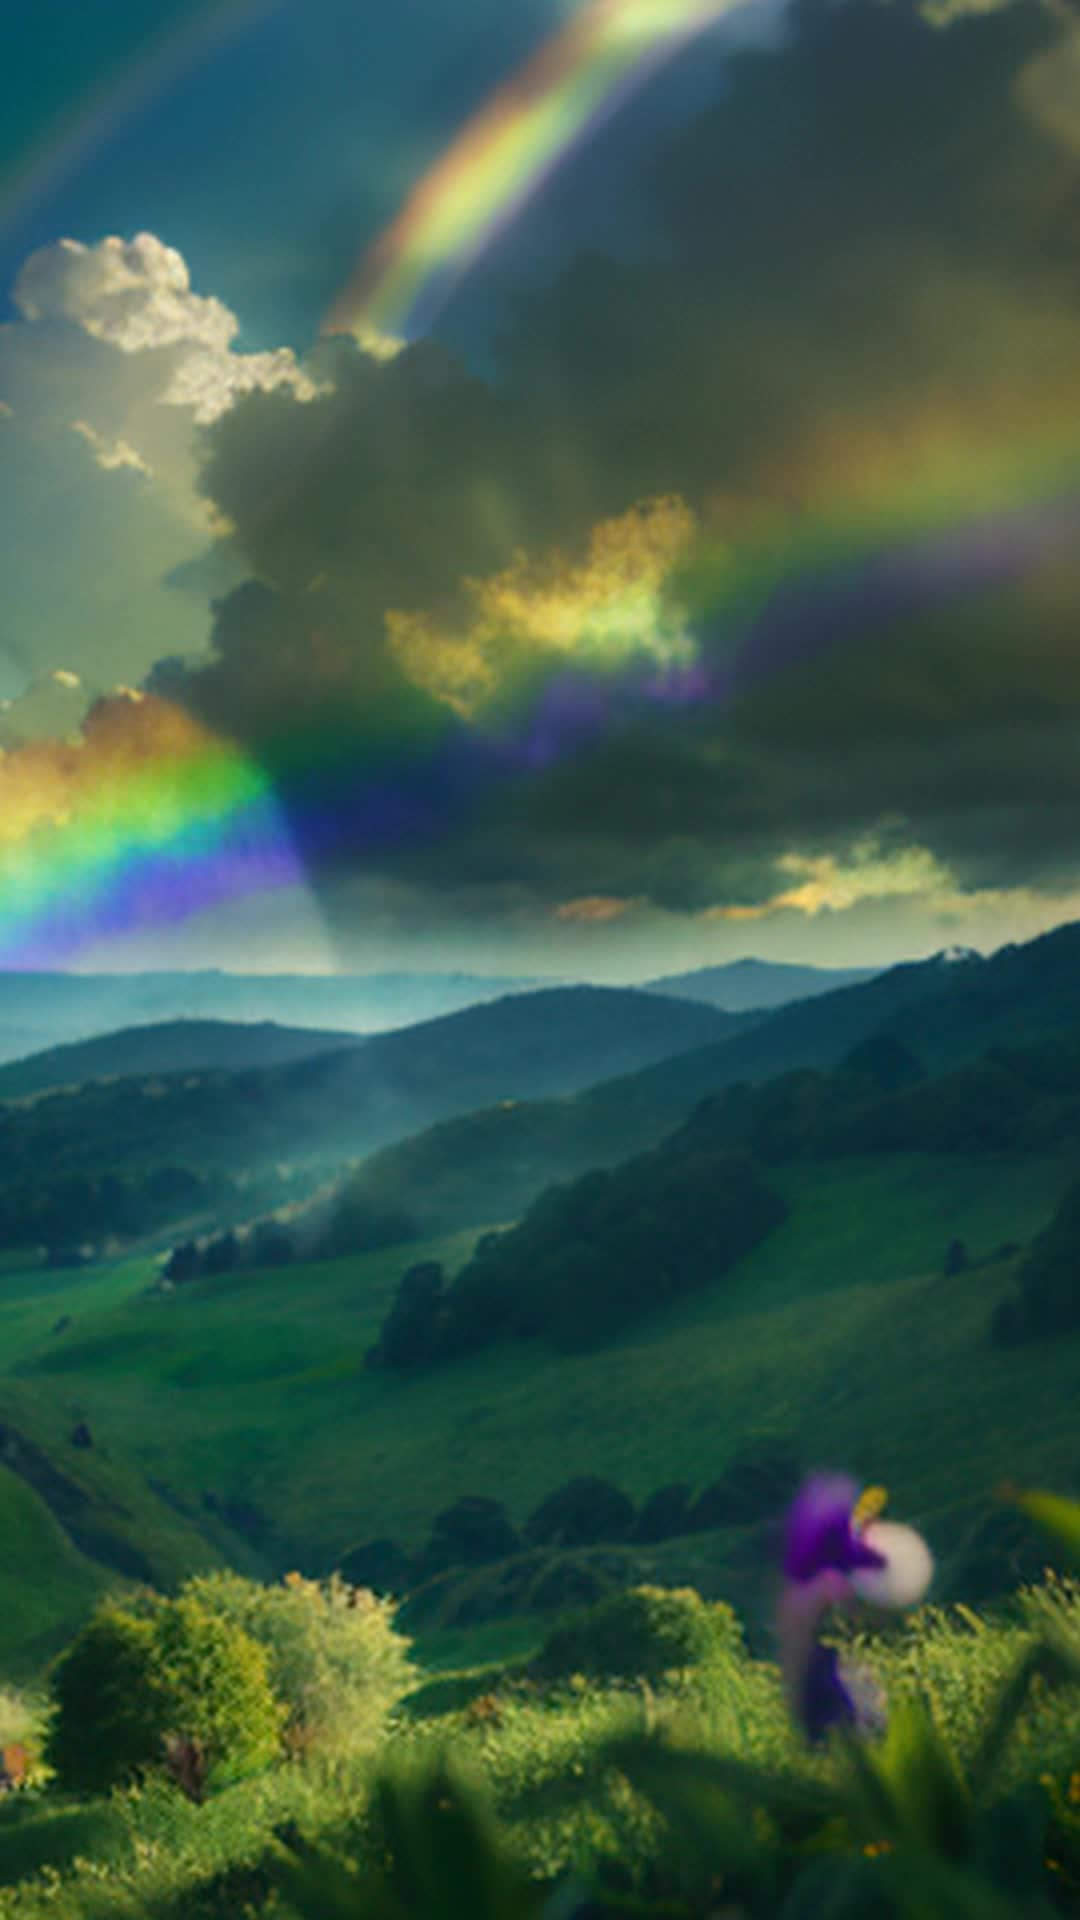 Vivid rainbow arching across sky, lush green landscape below, sunlight filtering through clouds, soft shadows, bright and vibrant colors, clear and sharp focus, wideangle view, ethereal and dreamy atmosphere, contrast between warm sunlight and cool mist, slight lens flare, rendered by octane